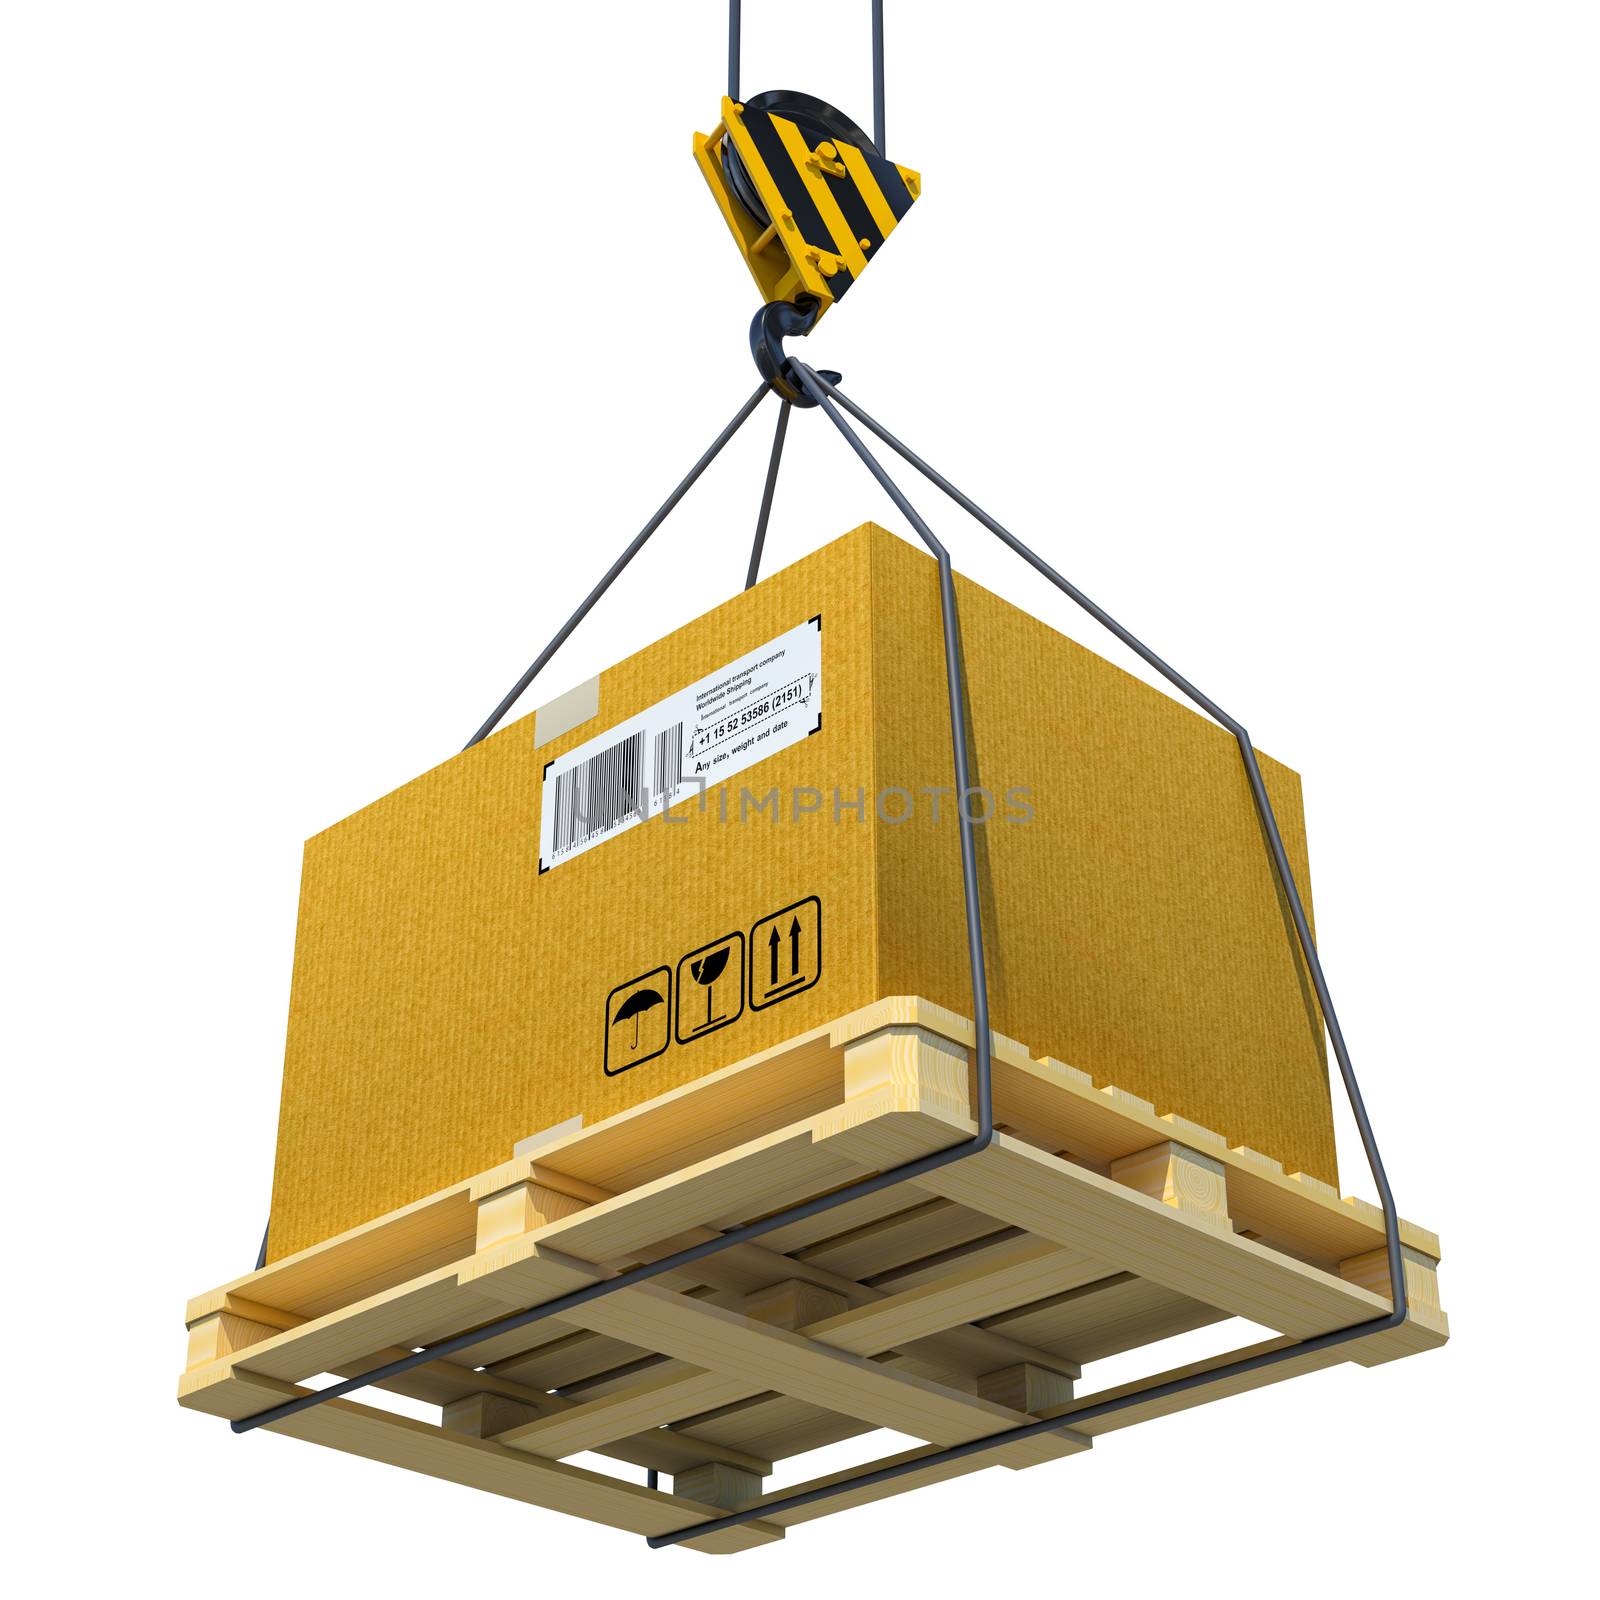 Pallet with cardboard lifted by crane by cherezoff